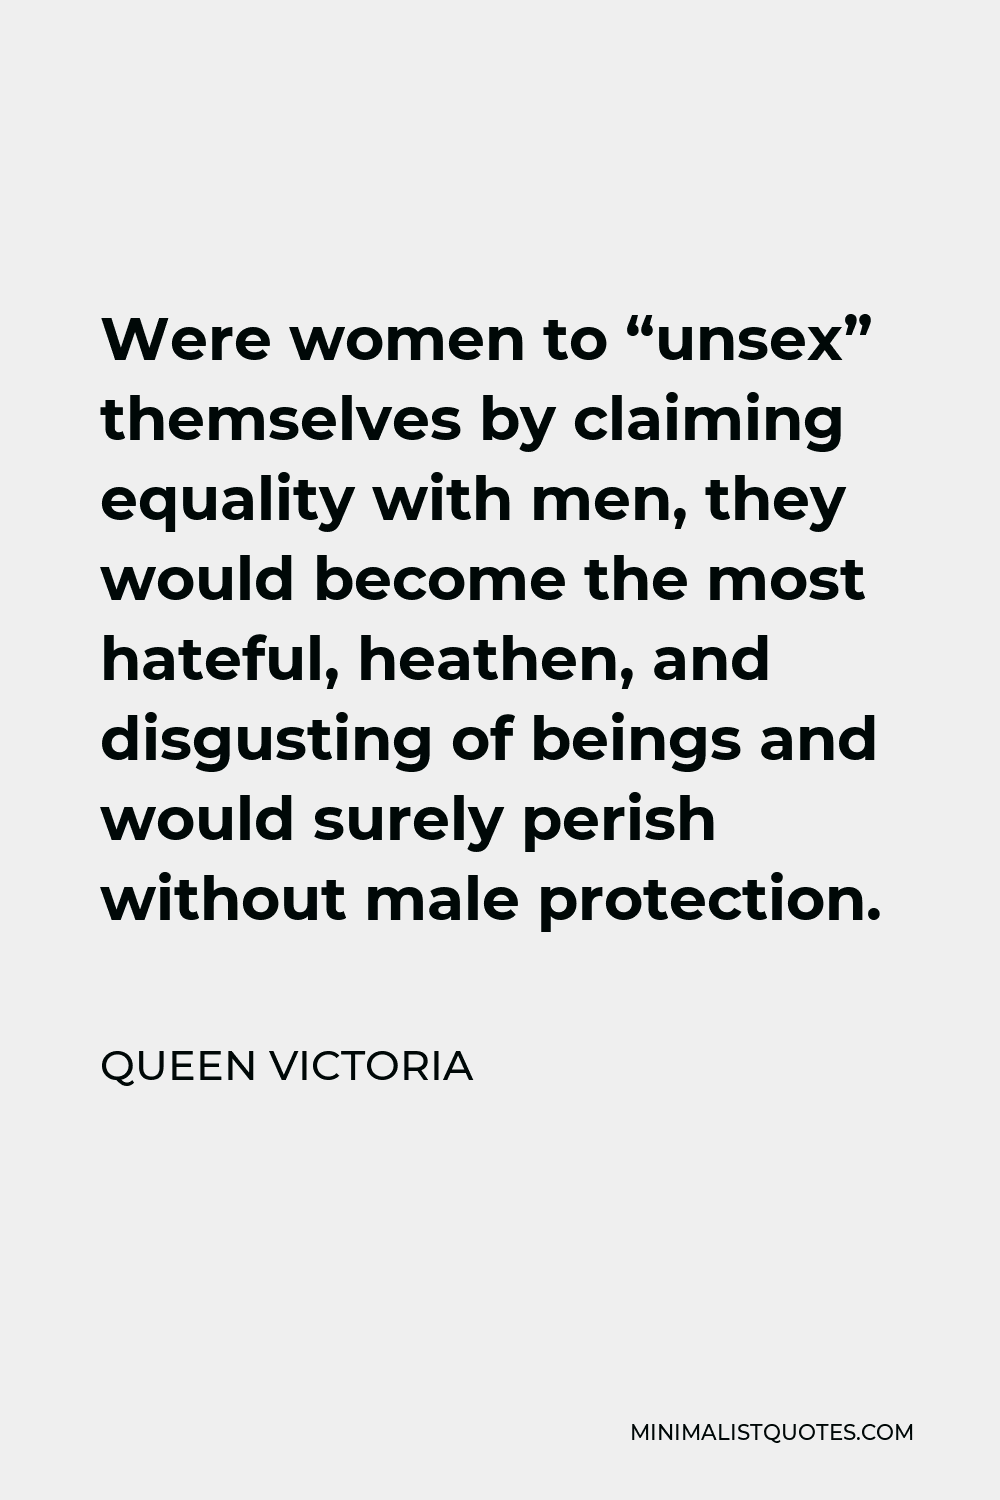 Queen Victoria Quote - Were women to “unsex” themselves by claiming equality with men, they would become the most hateful, heathen, and disgusting of beings and would surely perish without male protection.